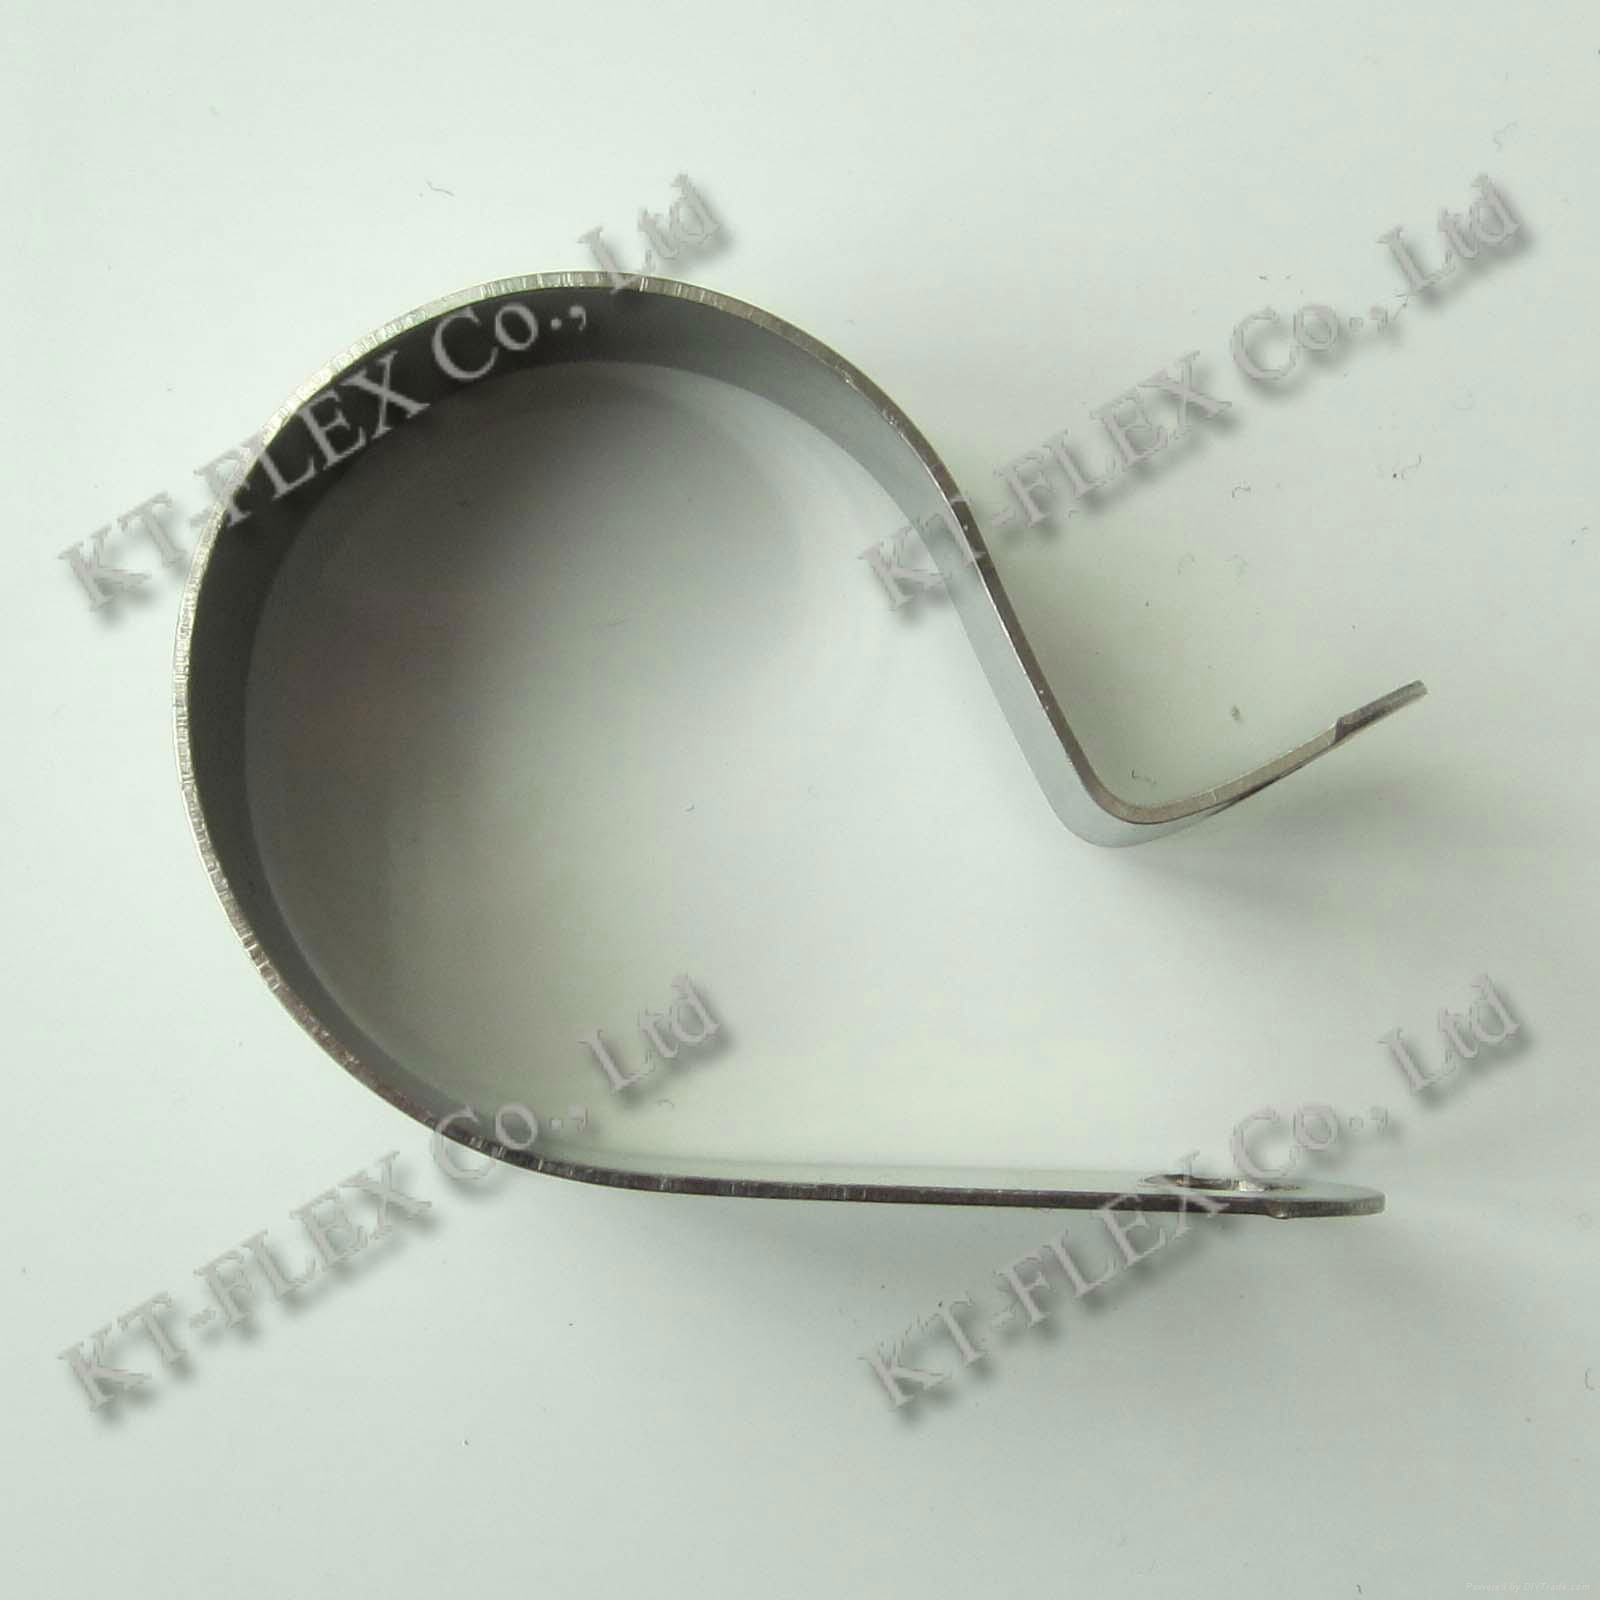 Carbon steel cable clip with EPDM coating